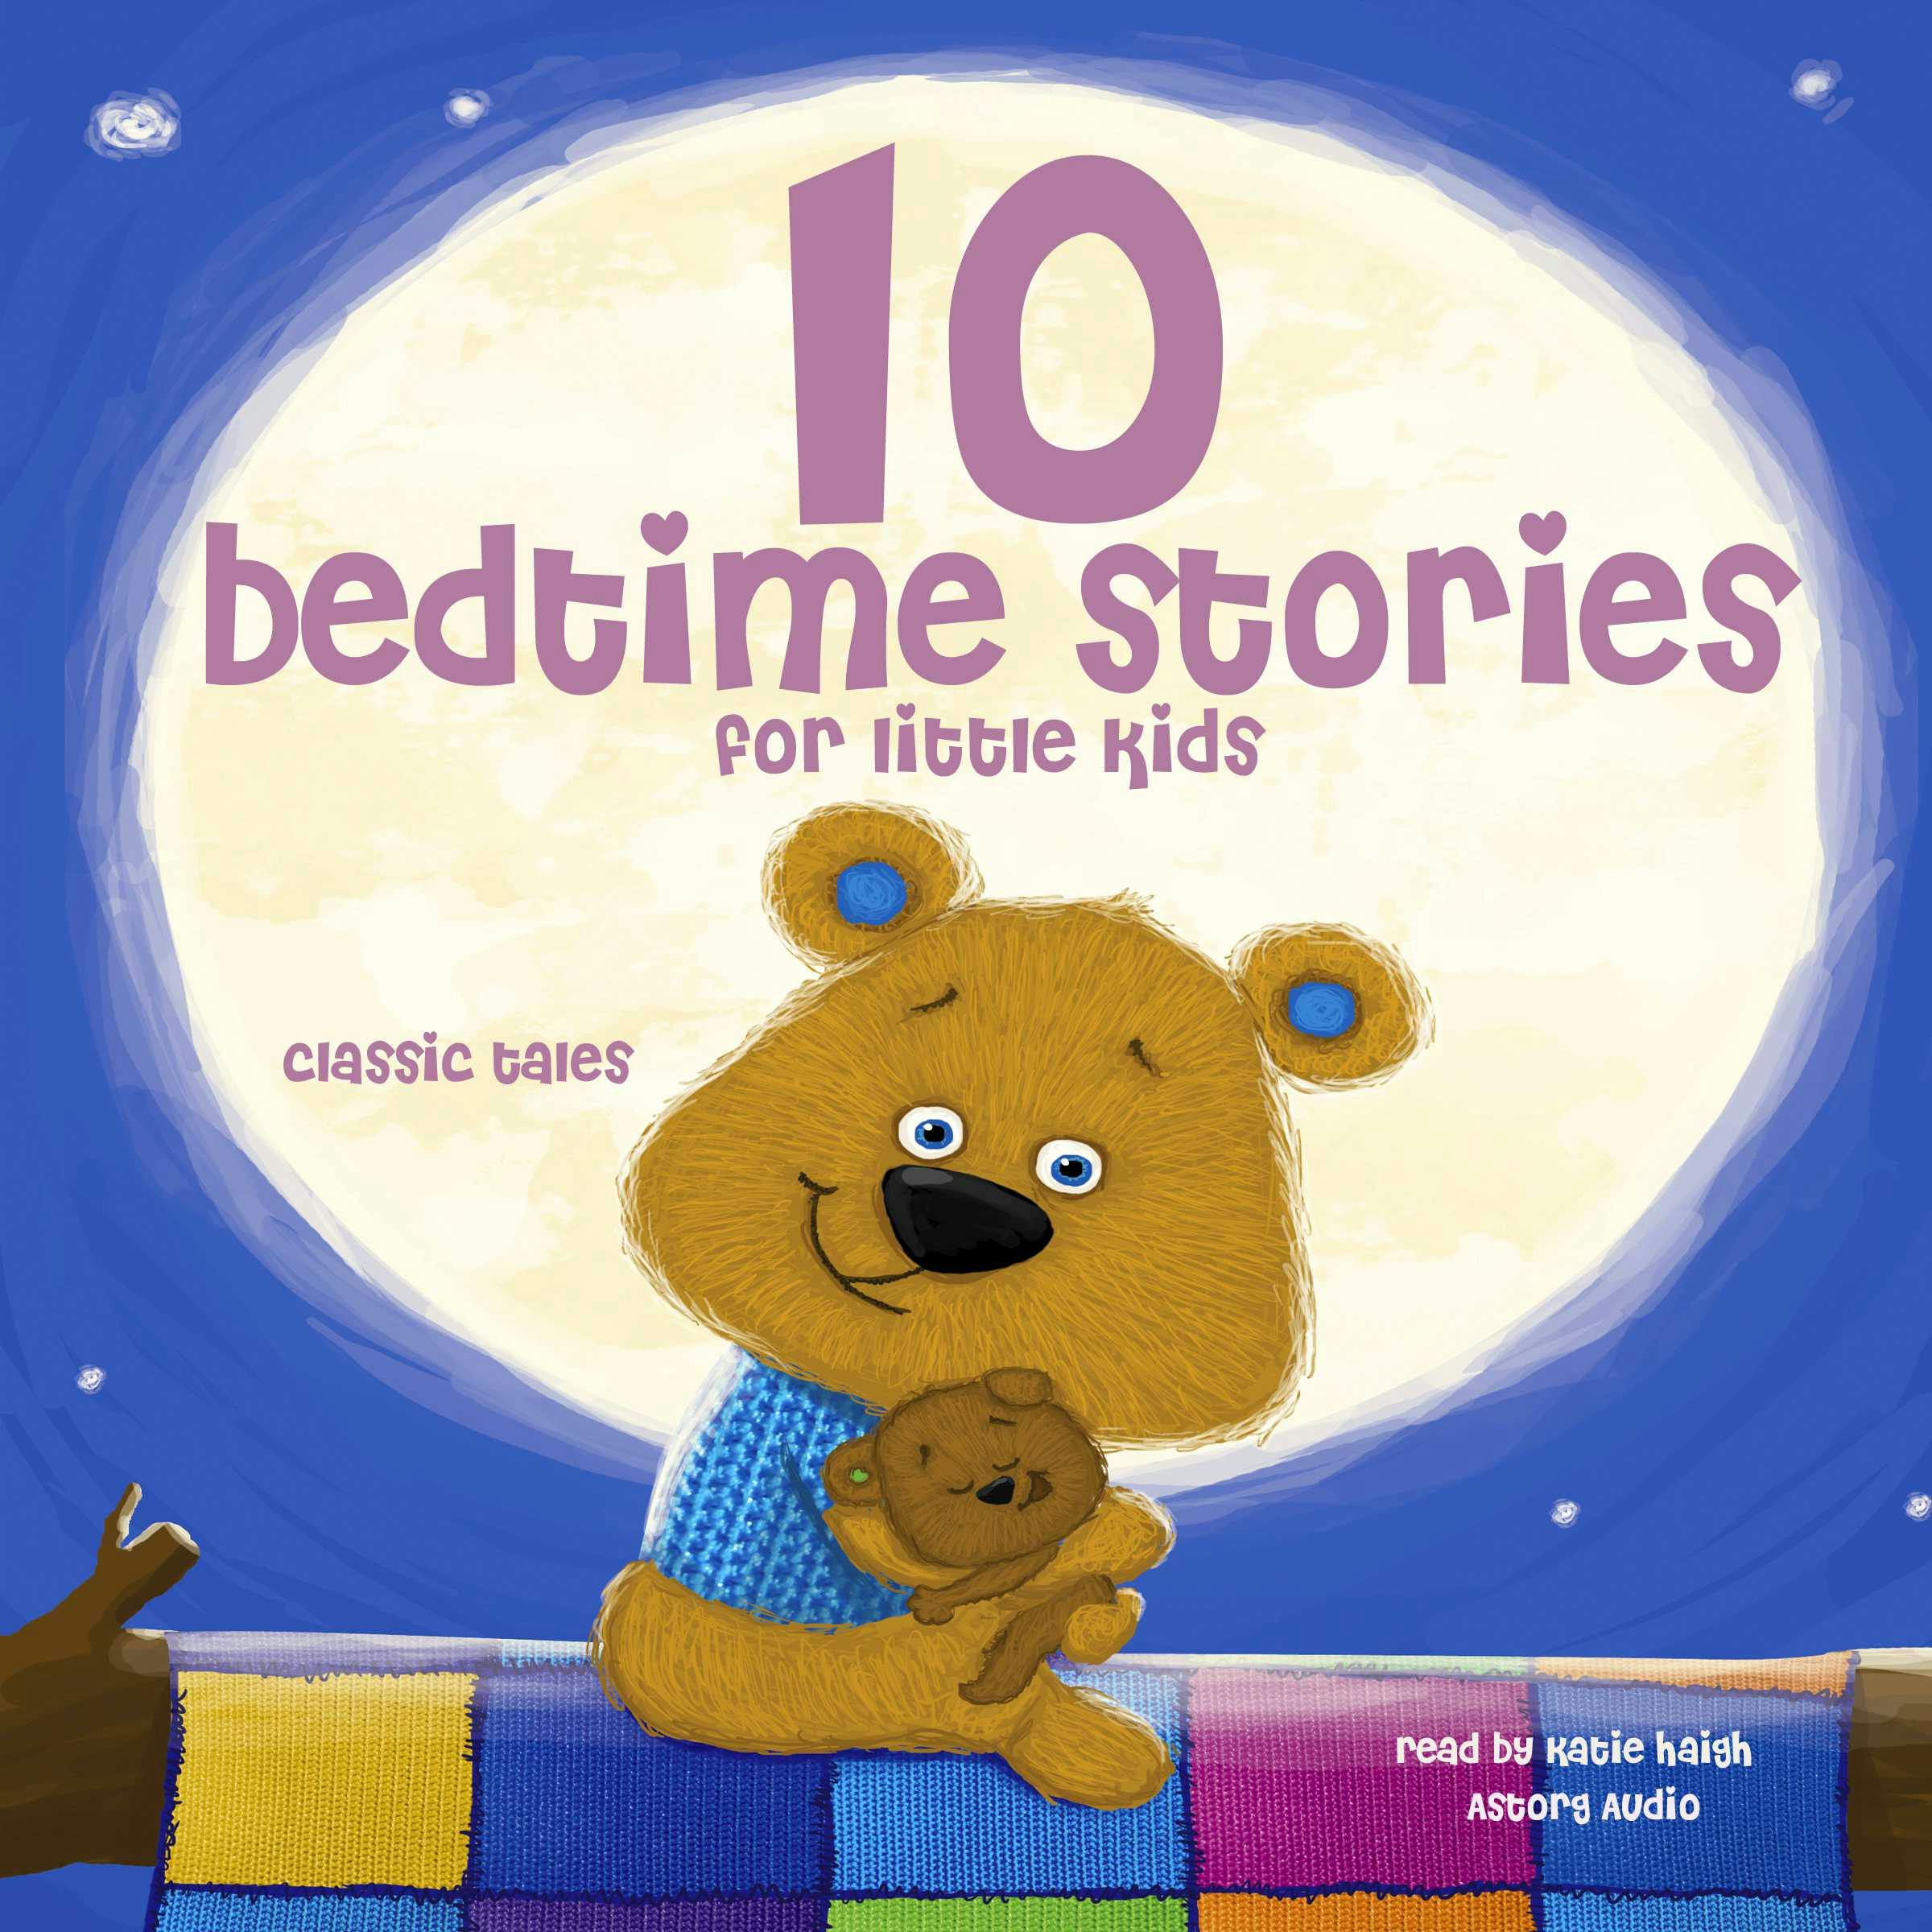 10 Bedtime Stories For Little Kids: Best of stories and tales for children - undefined